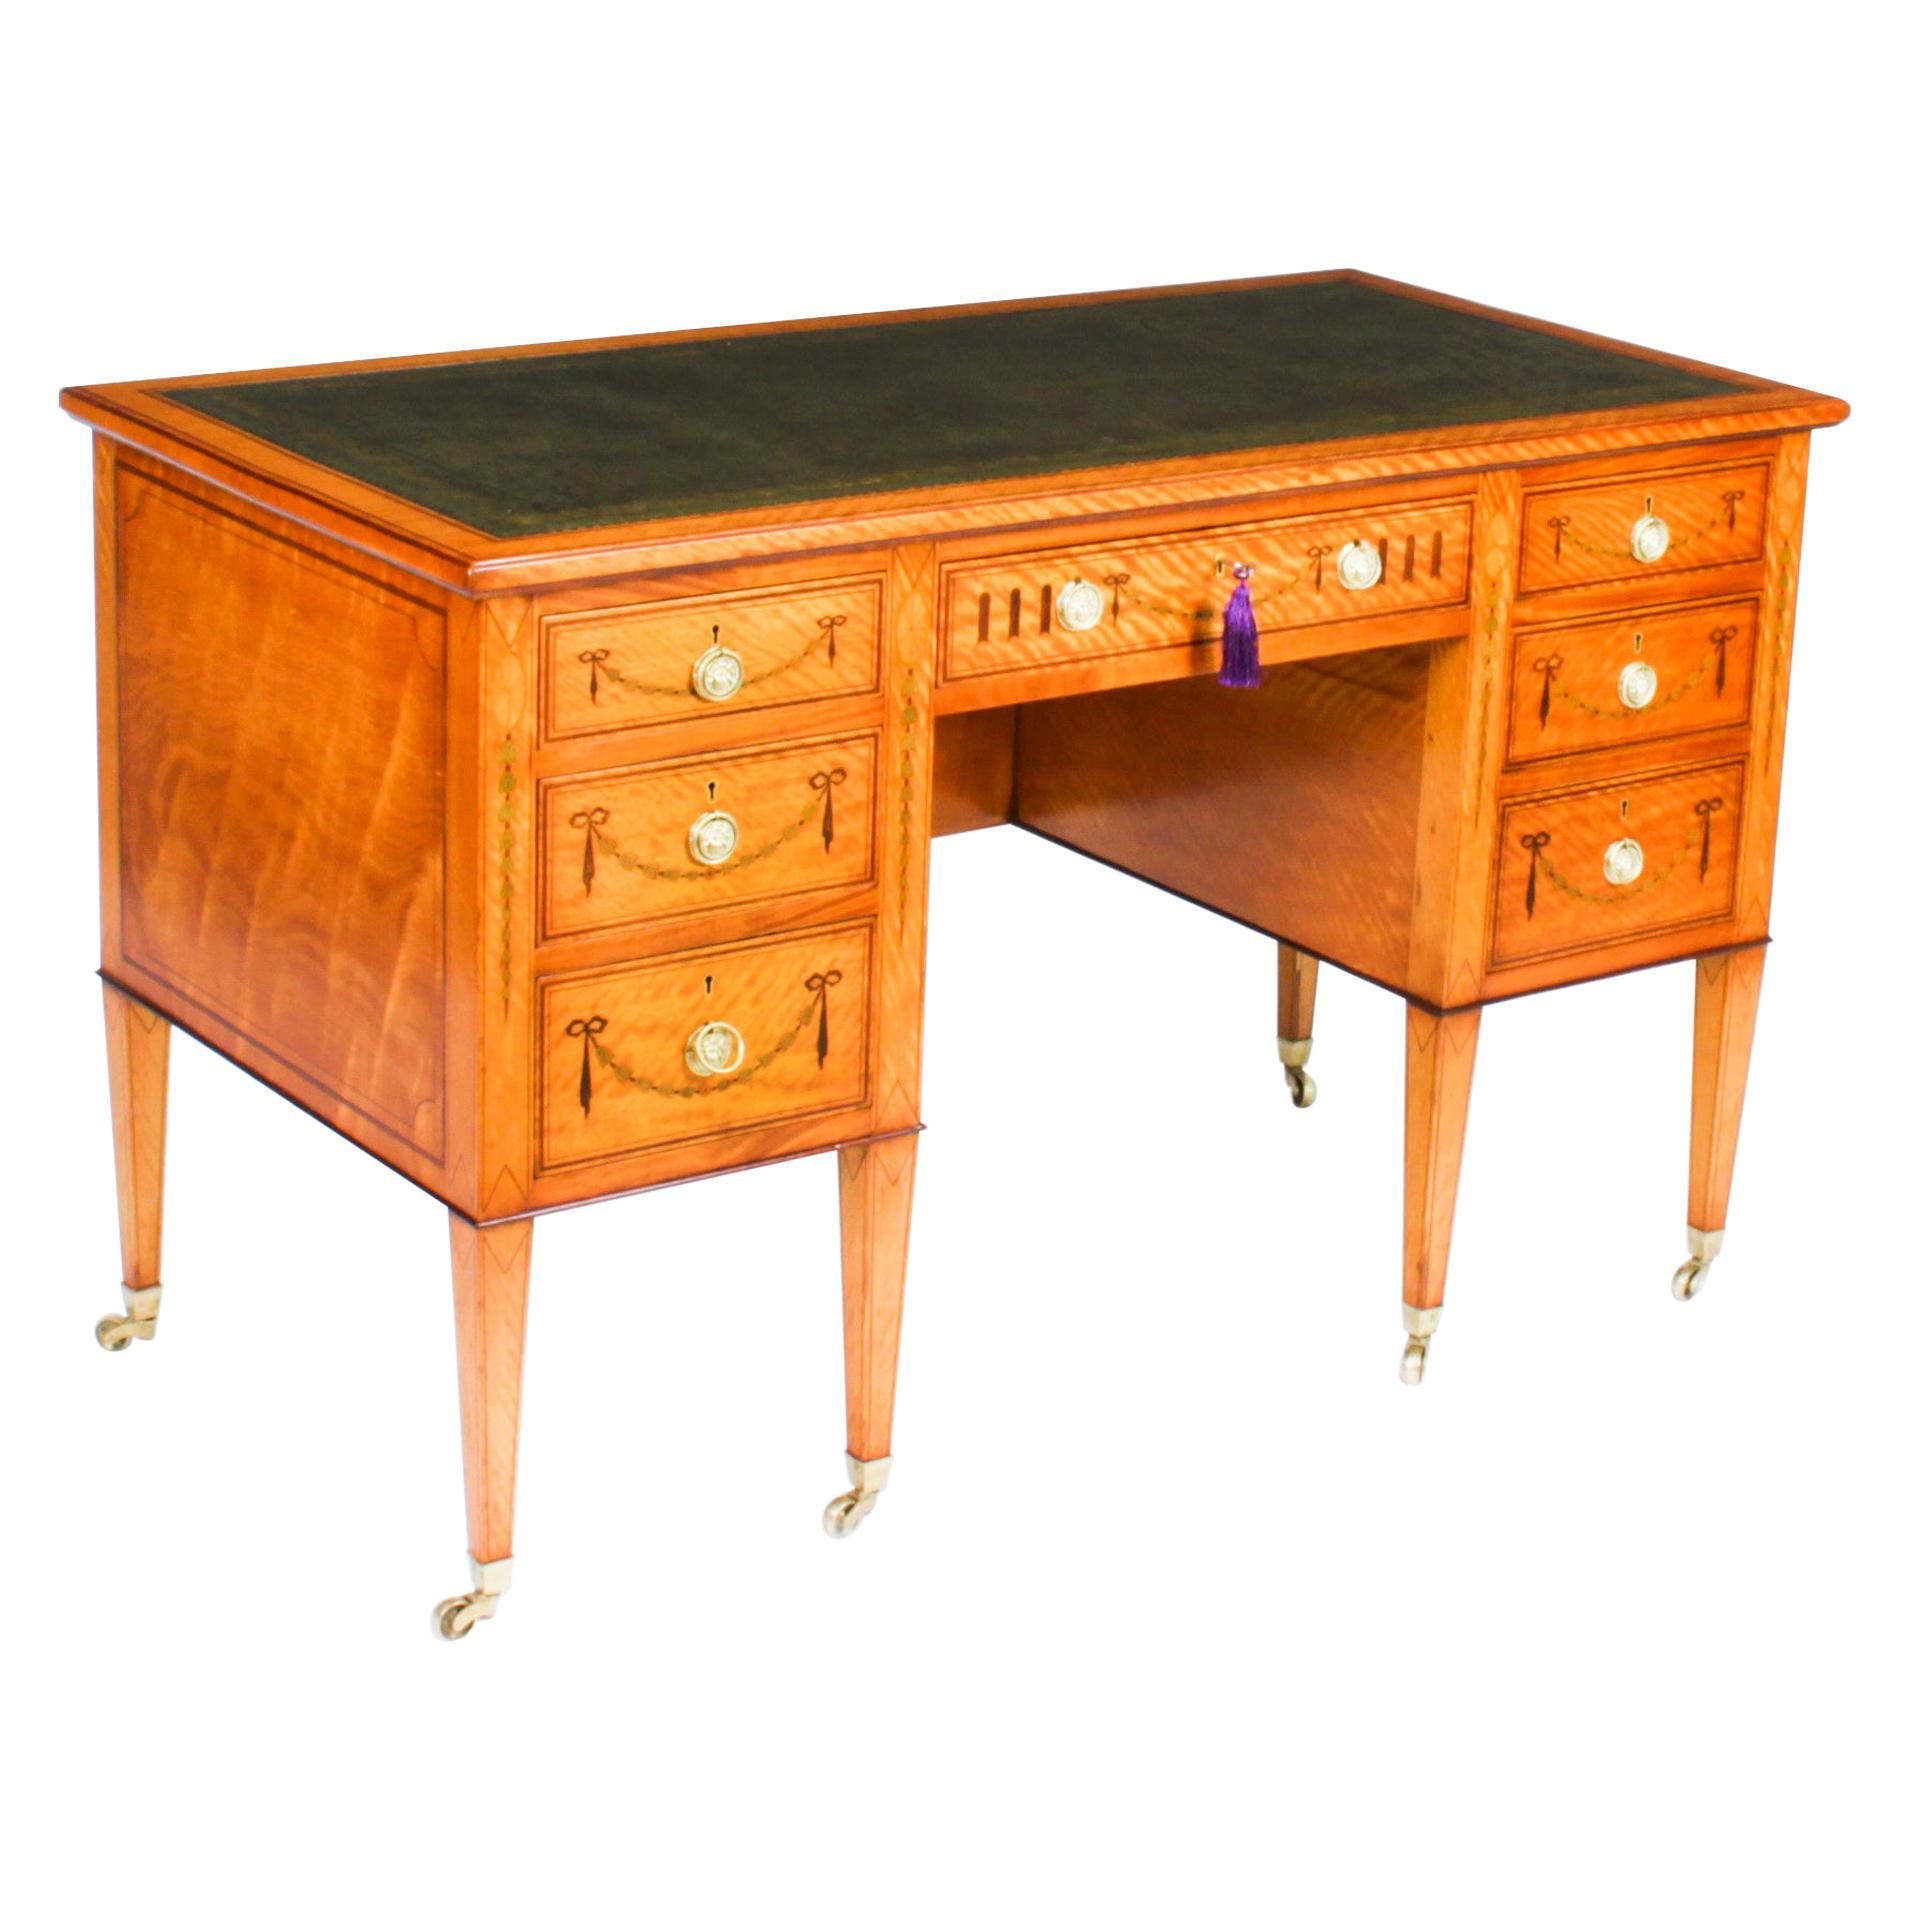 Antique Inlaid Satinwood Writing Table Desk by Edwards & Roberts, 19th Century For Sale